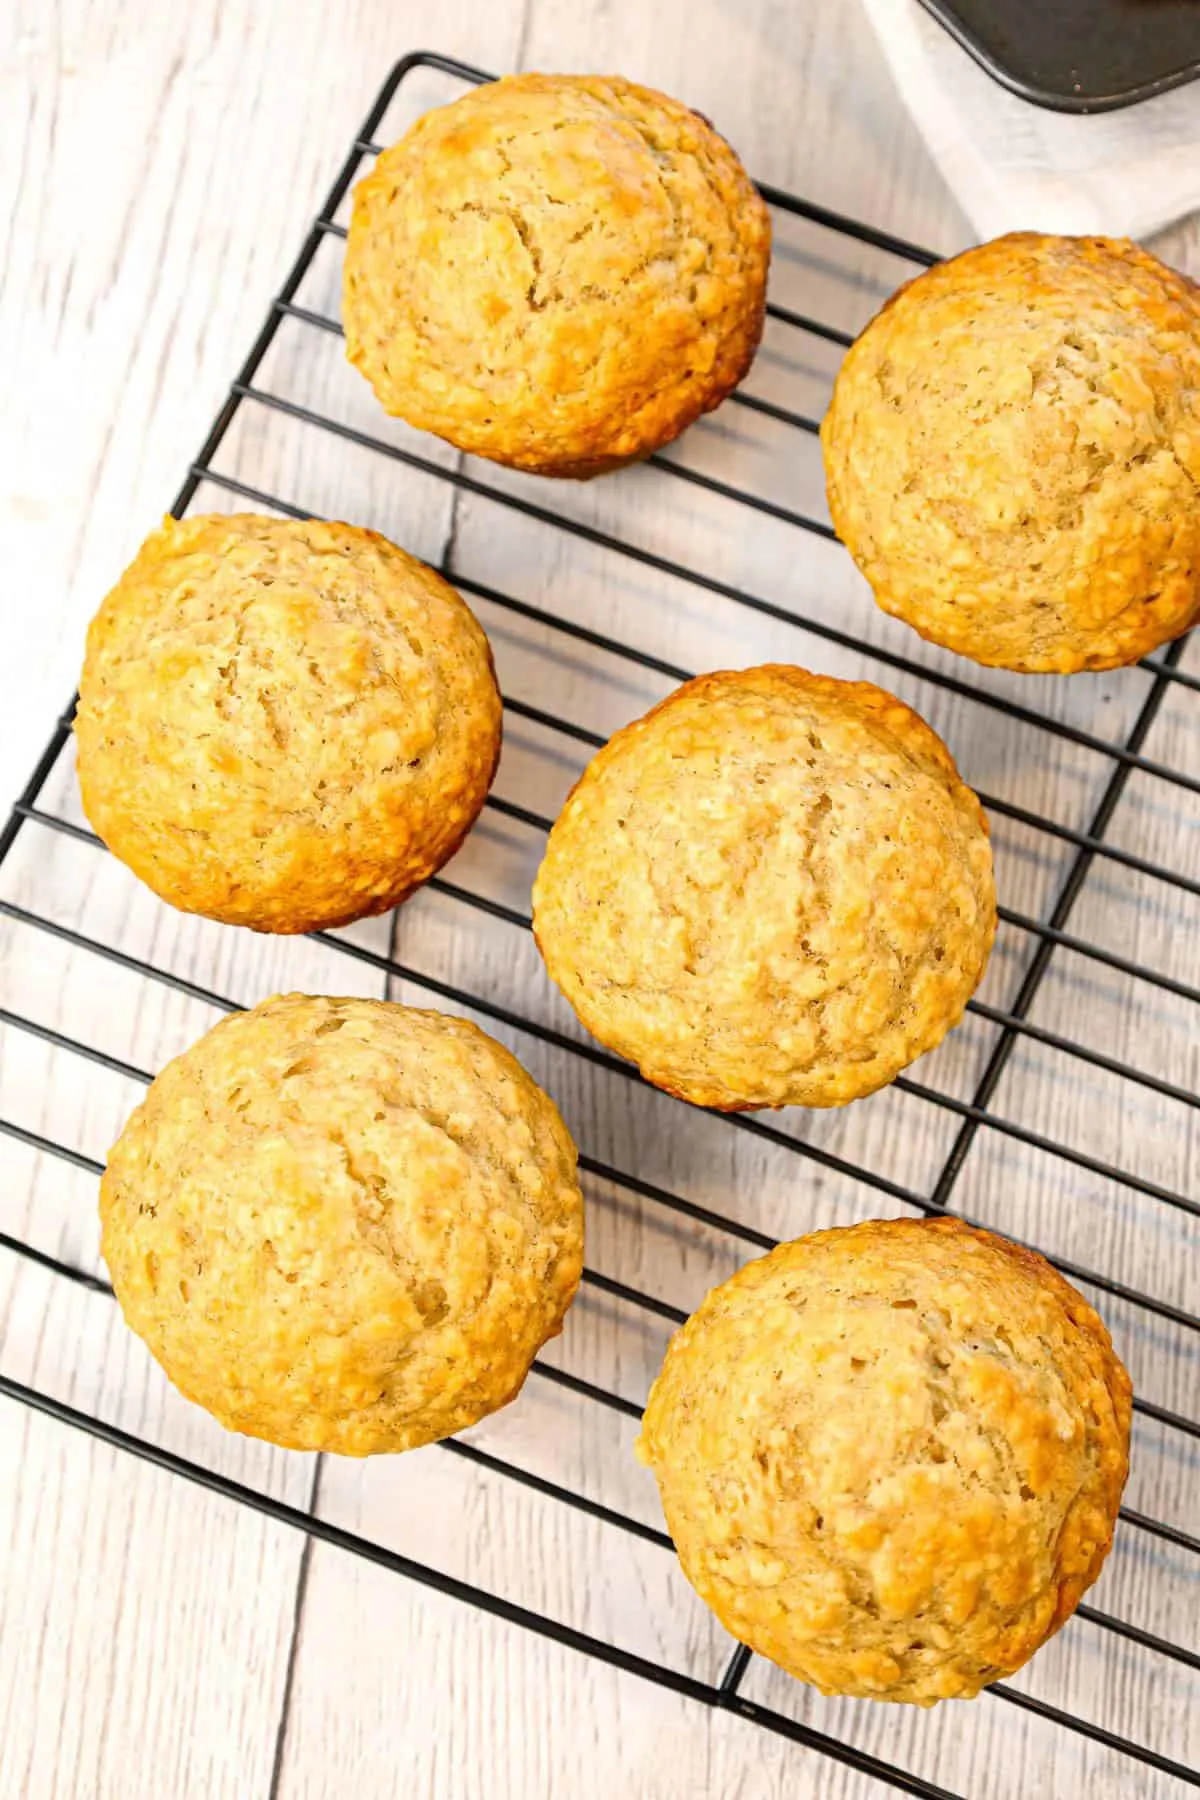 Banana Oatmeal Muffins are a delicious snack or breakfast treat made with ripe bananas and quick oats.